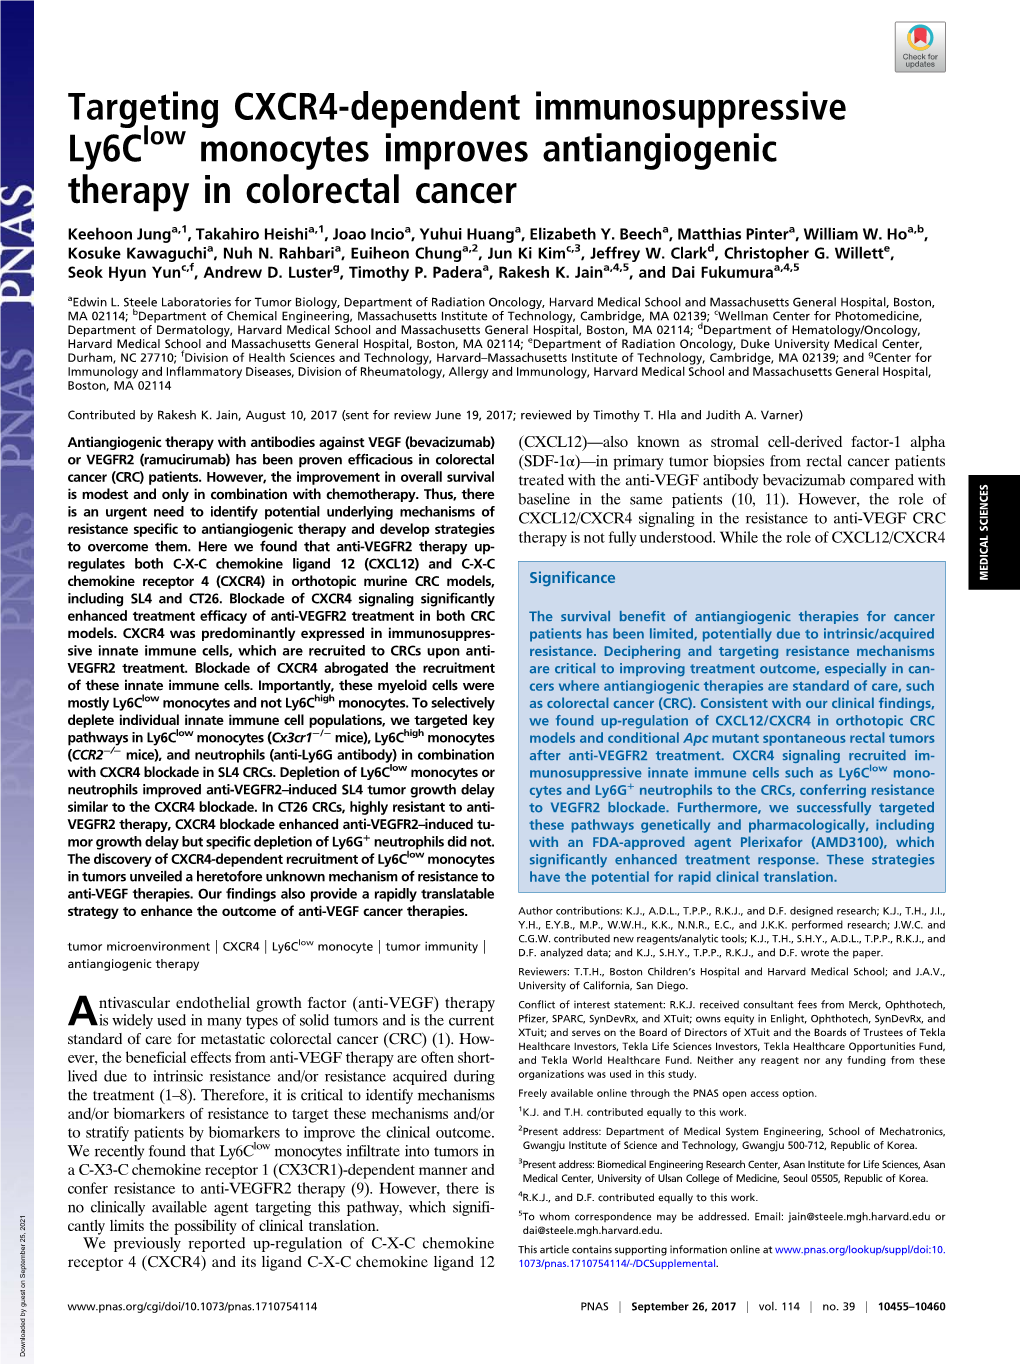 Monocytes Improves Antiangiogenic Therapy in Colorectal Cancer